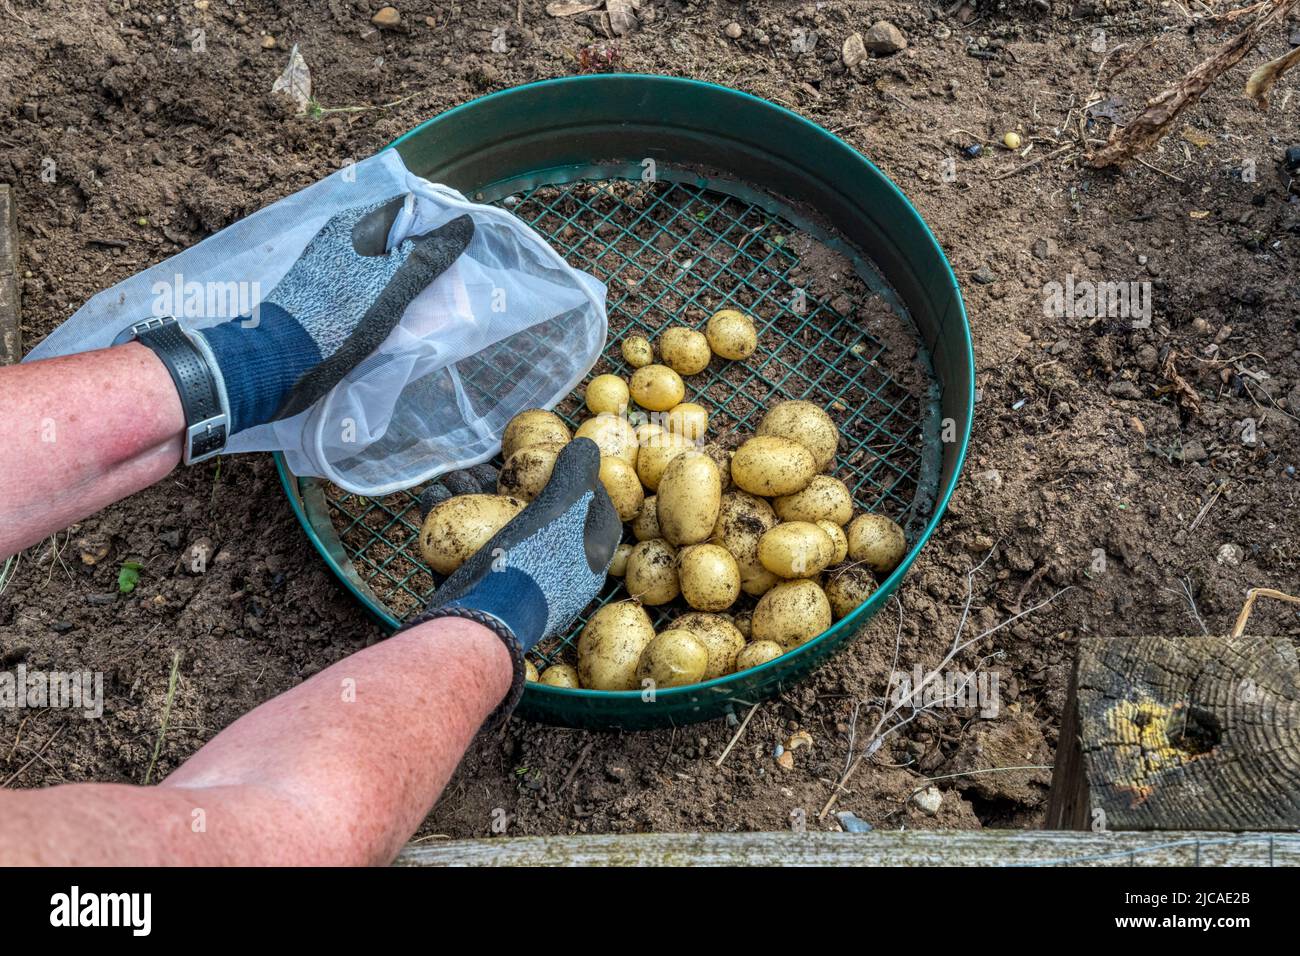 Woman harvesting an early crop of Vivaldi potatoes grown in a container. Stock Photo